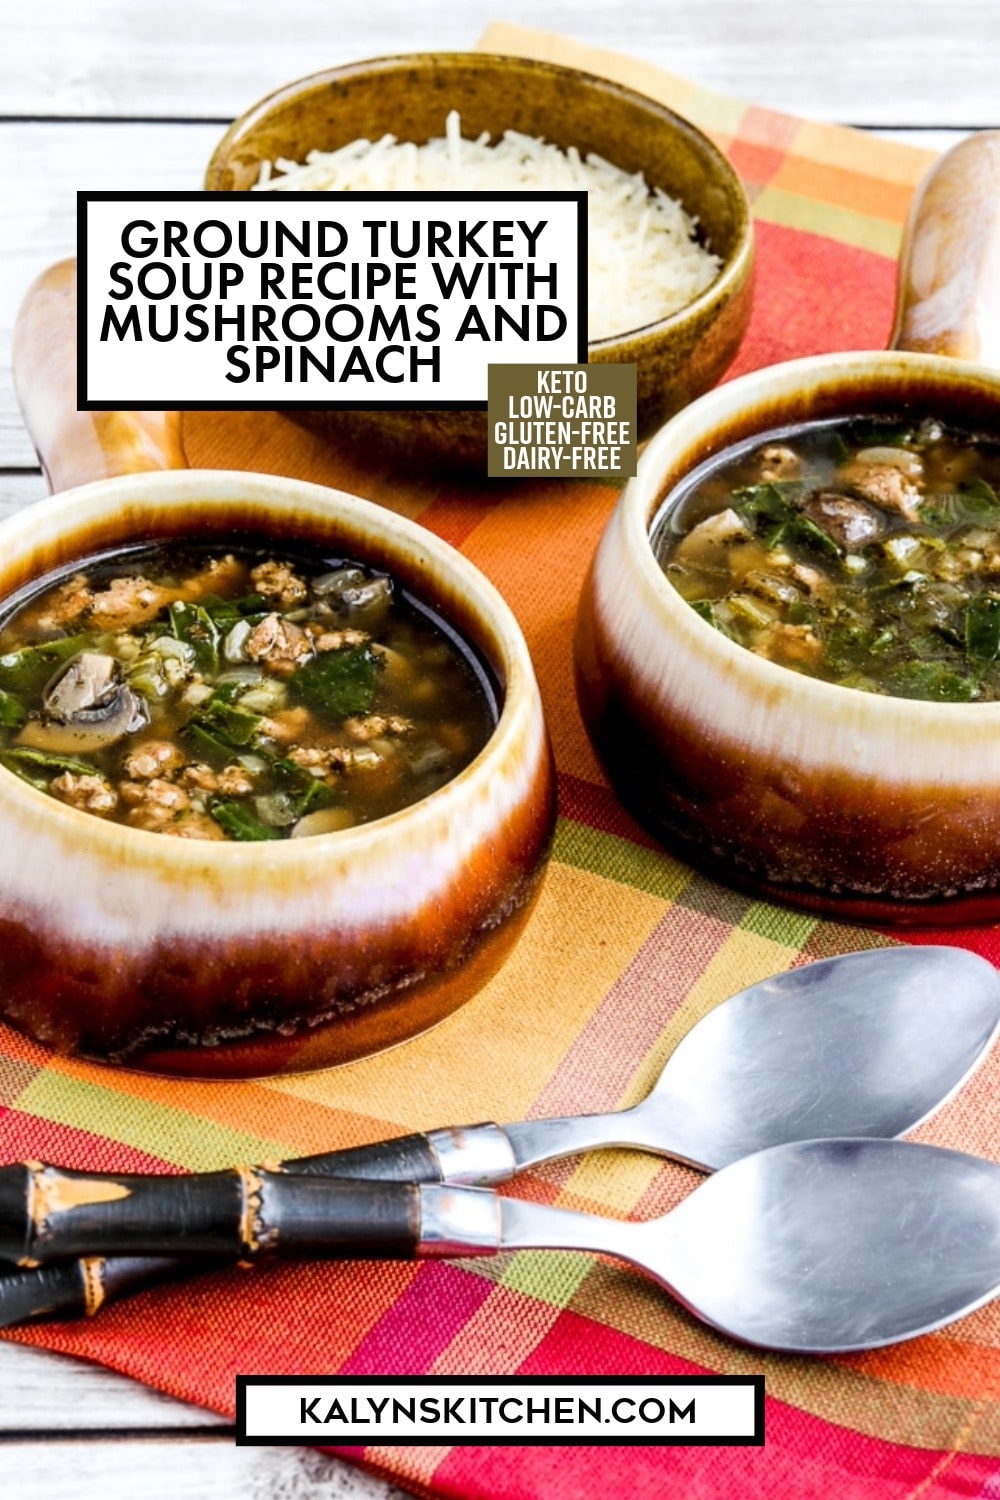 Pinterest image of Ground Turkey Soup Recipe with Mushrooms and Spinach